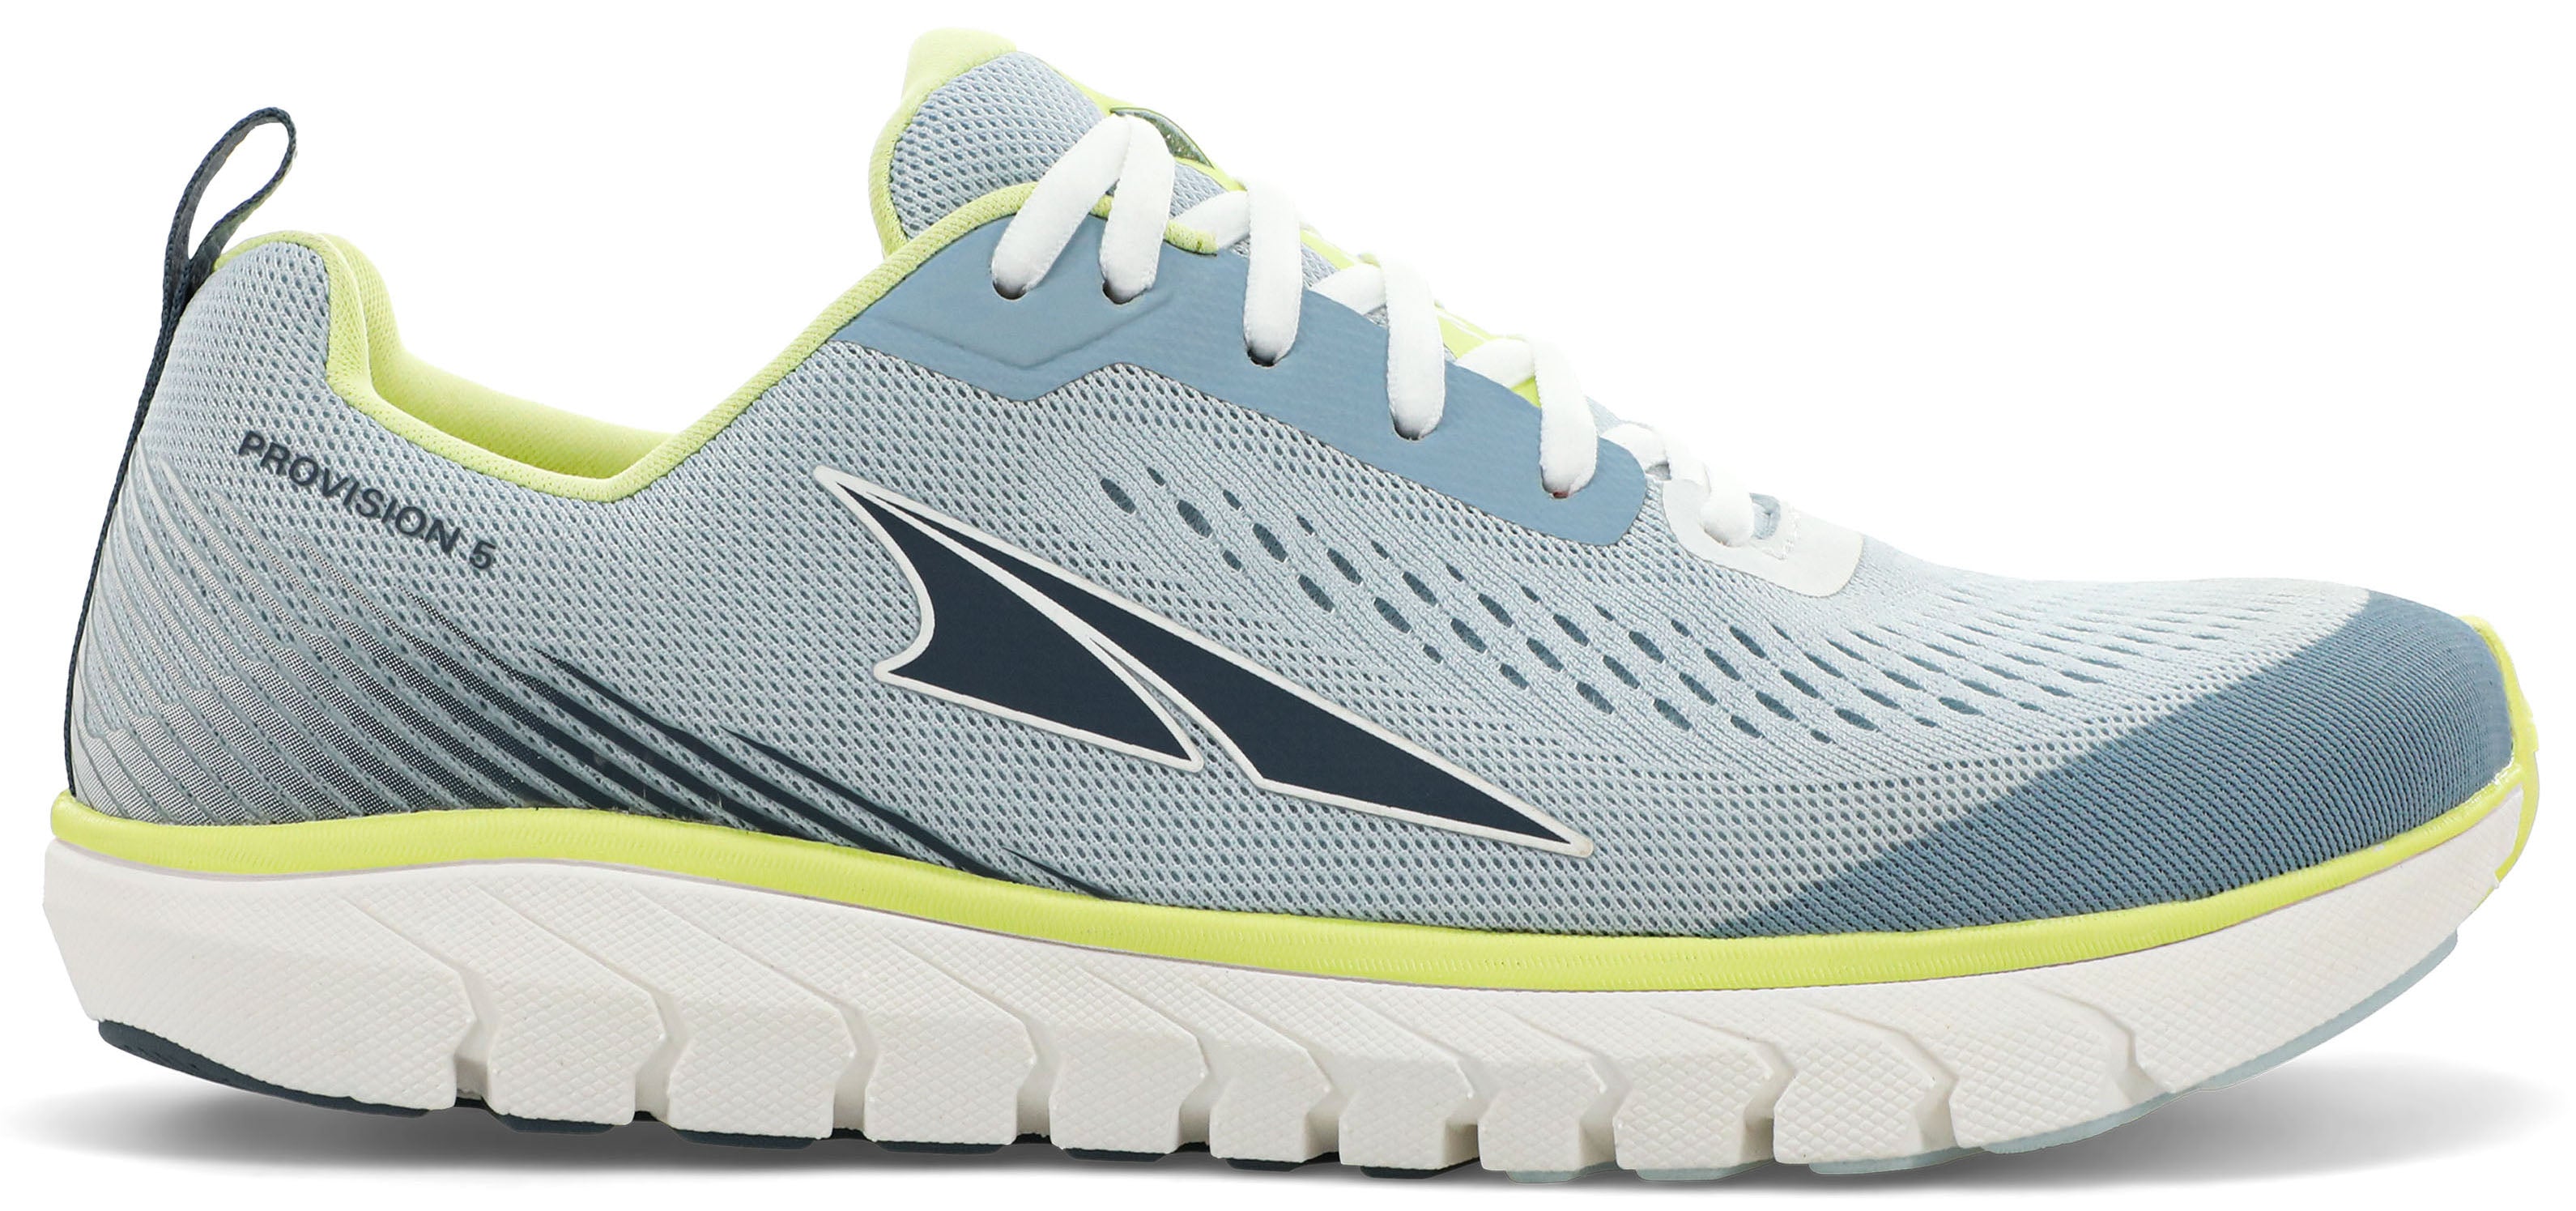 Women's Altra Provision 5 Road Running Shoe in Light Blue/Lime from the side